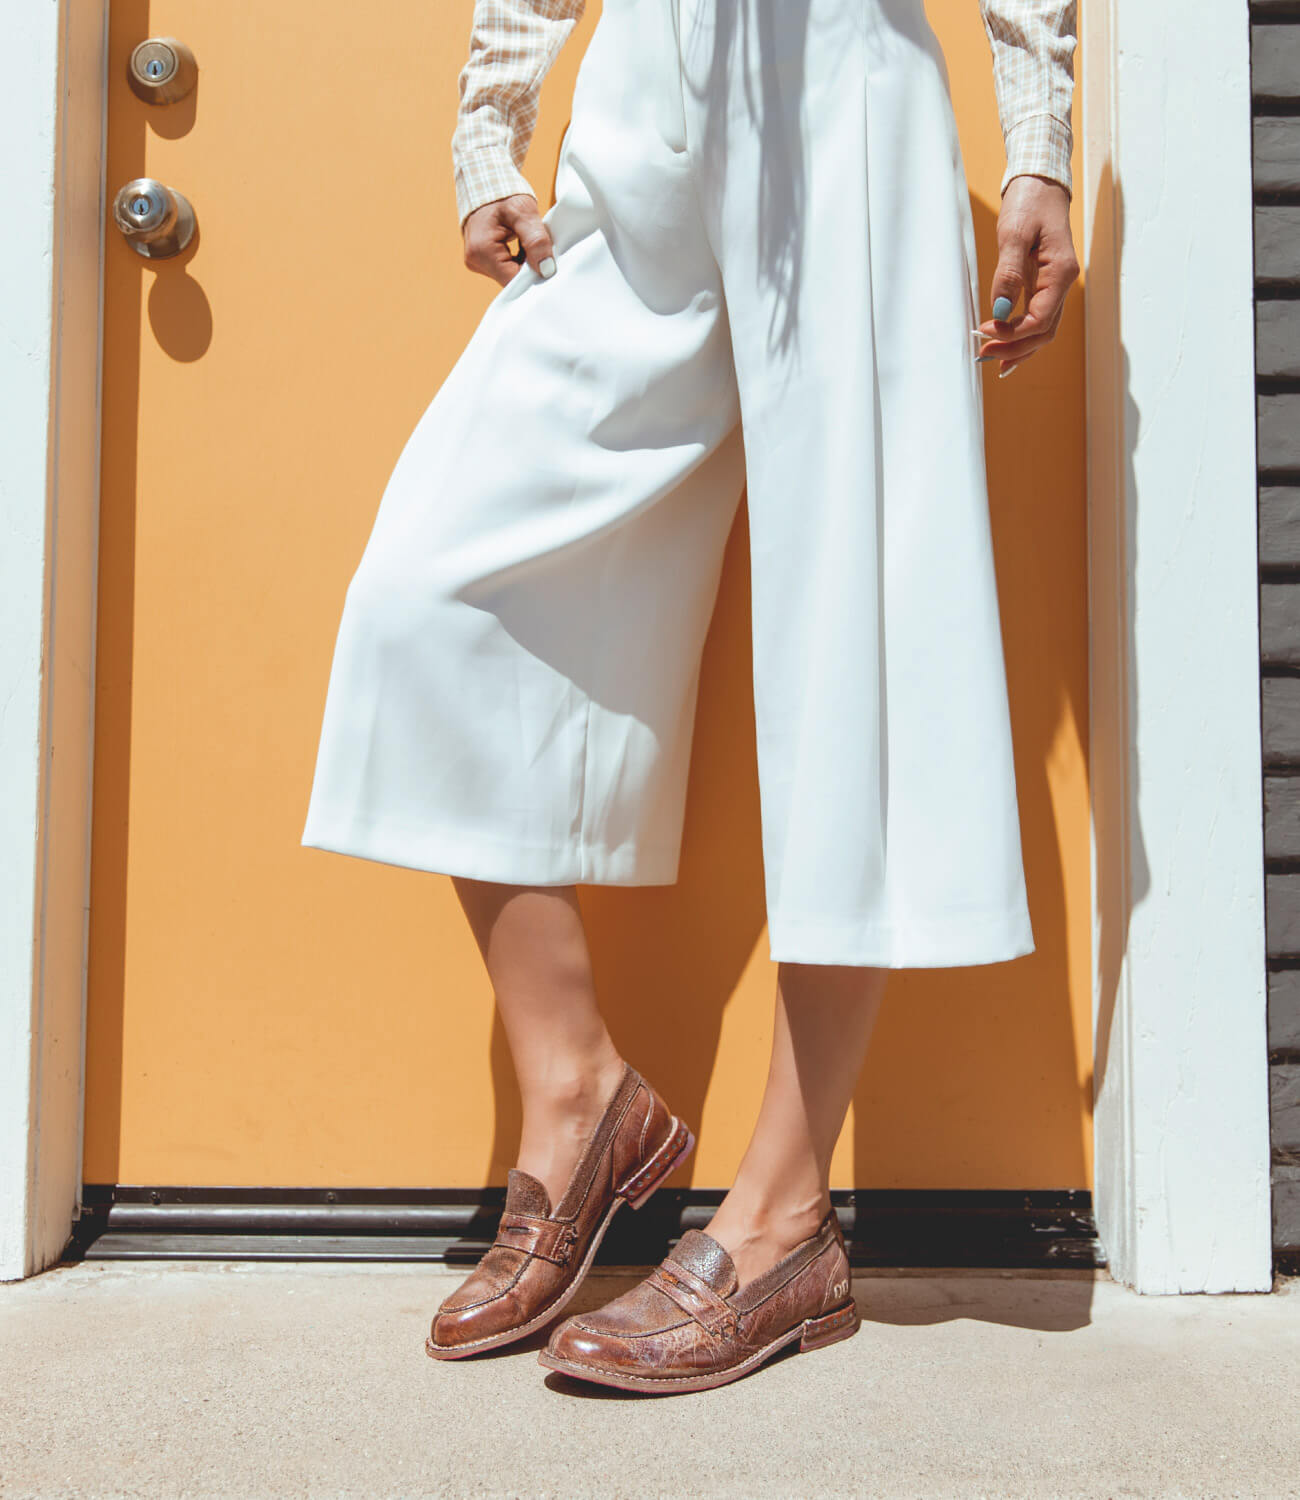 A woman is standing in front of a yellow door wearing white pants and Bed Stu Reina shoes.